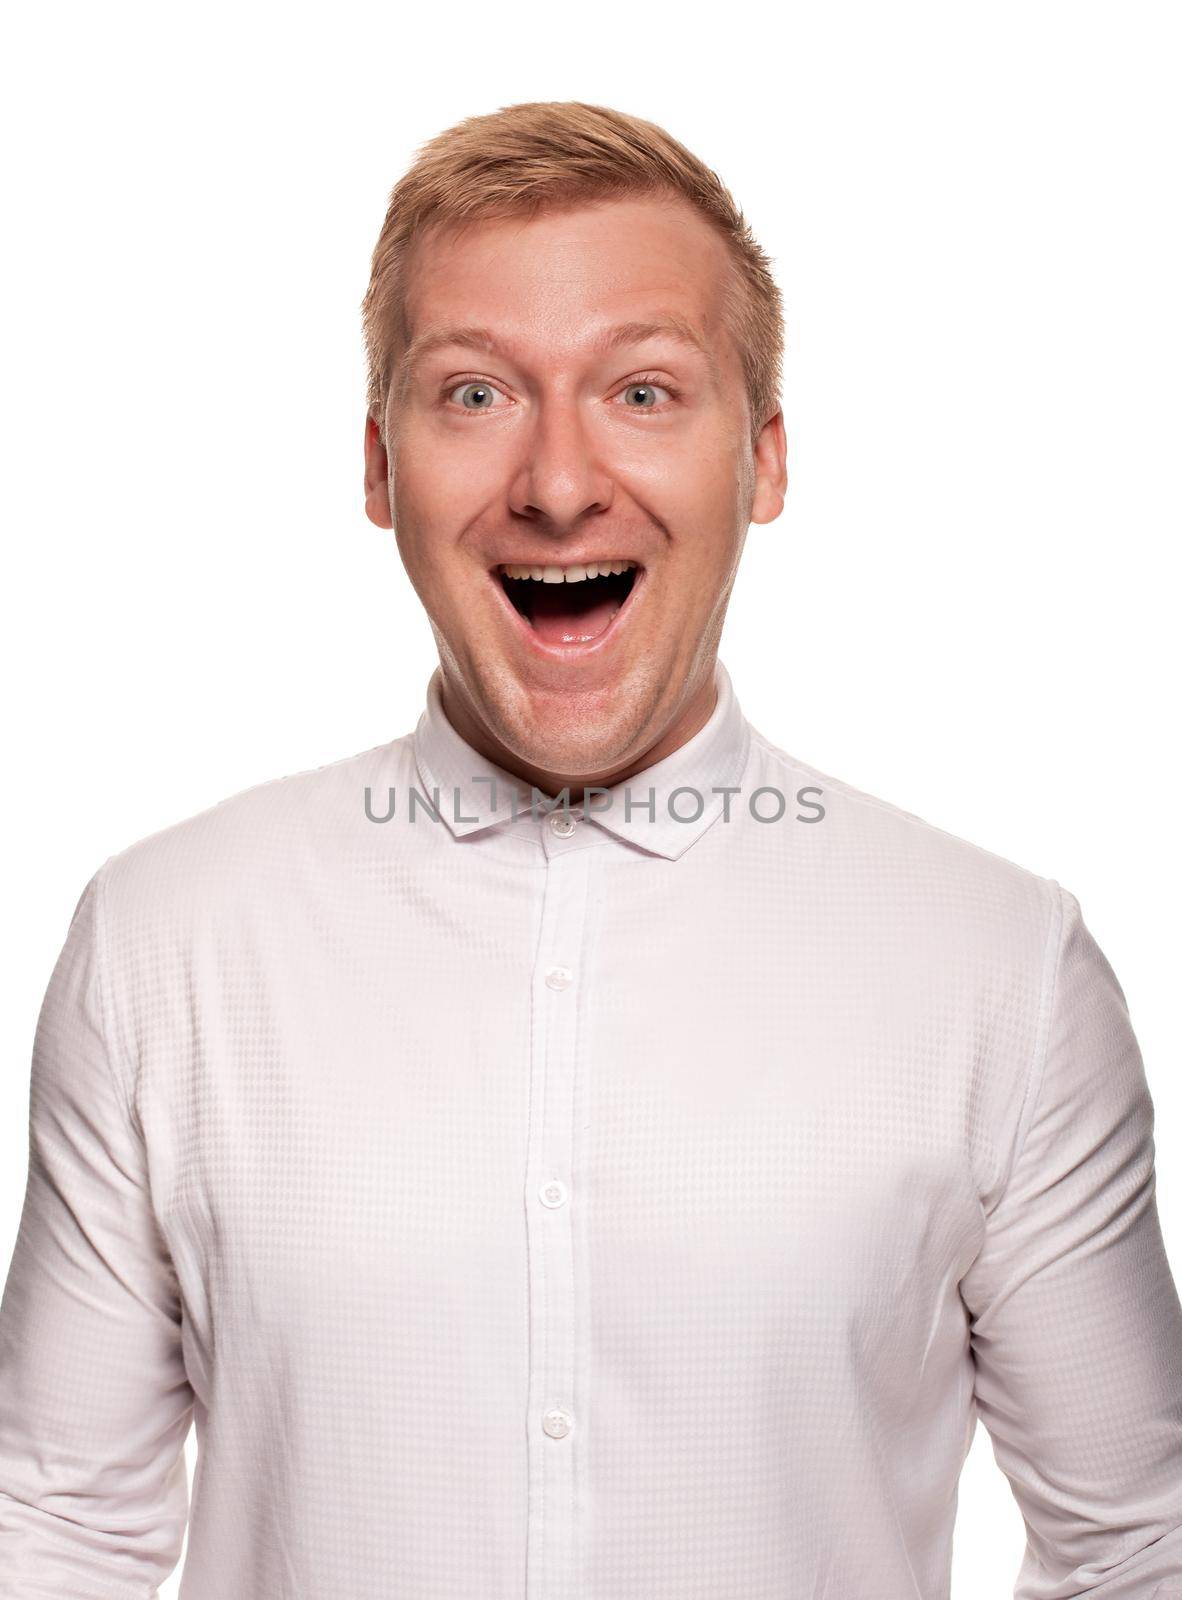 Imposing, young, blond man in a white shirt is looking very happy, while standing isolated on a white background